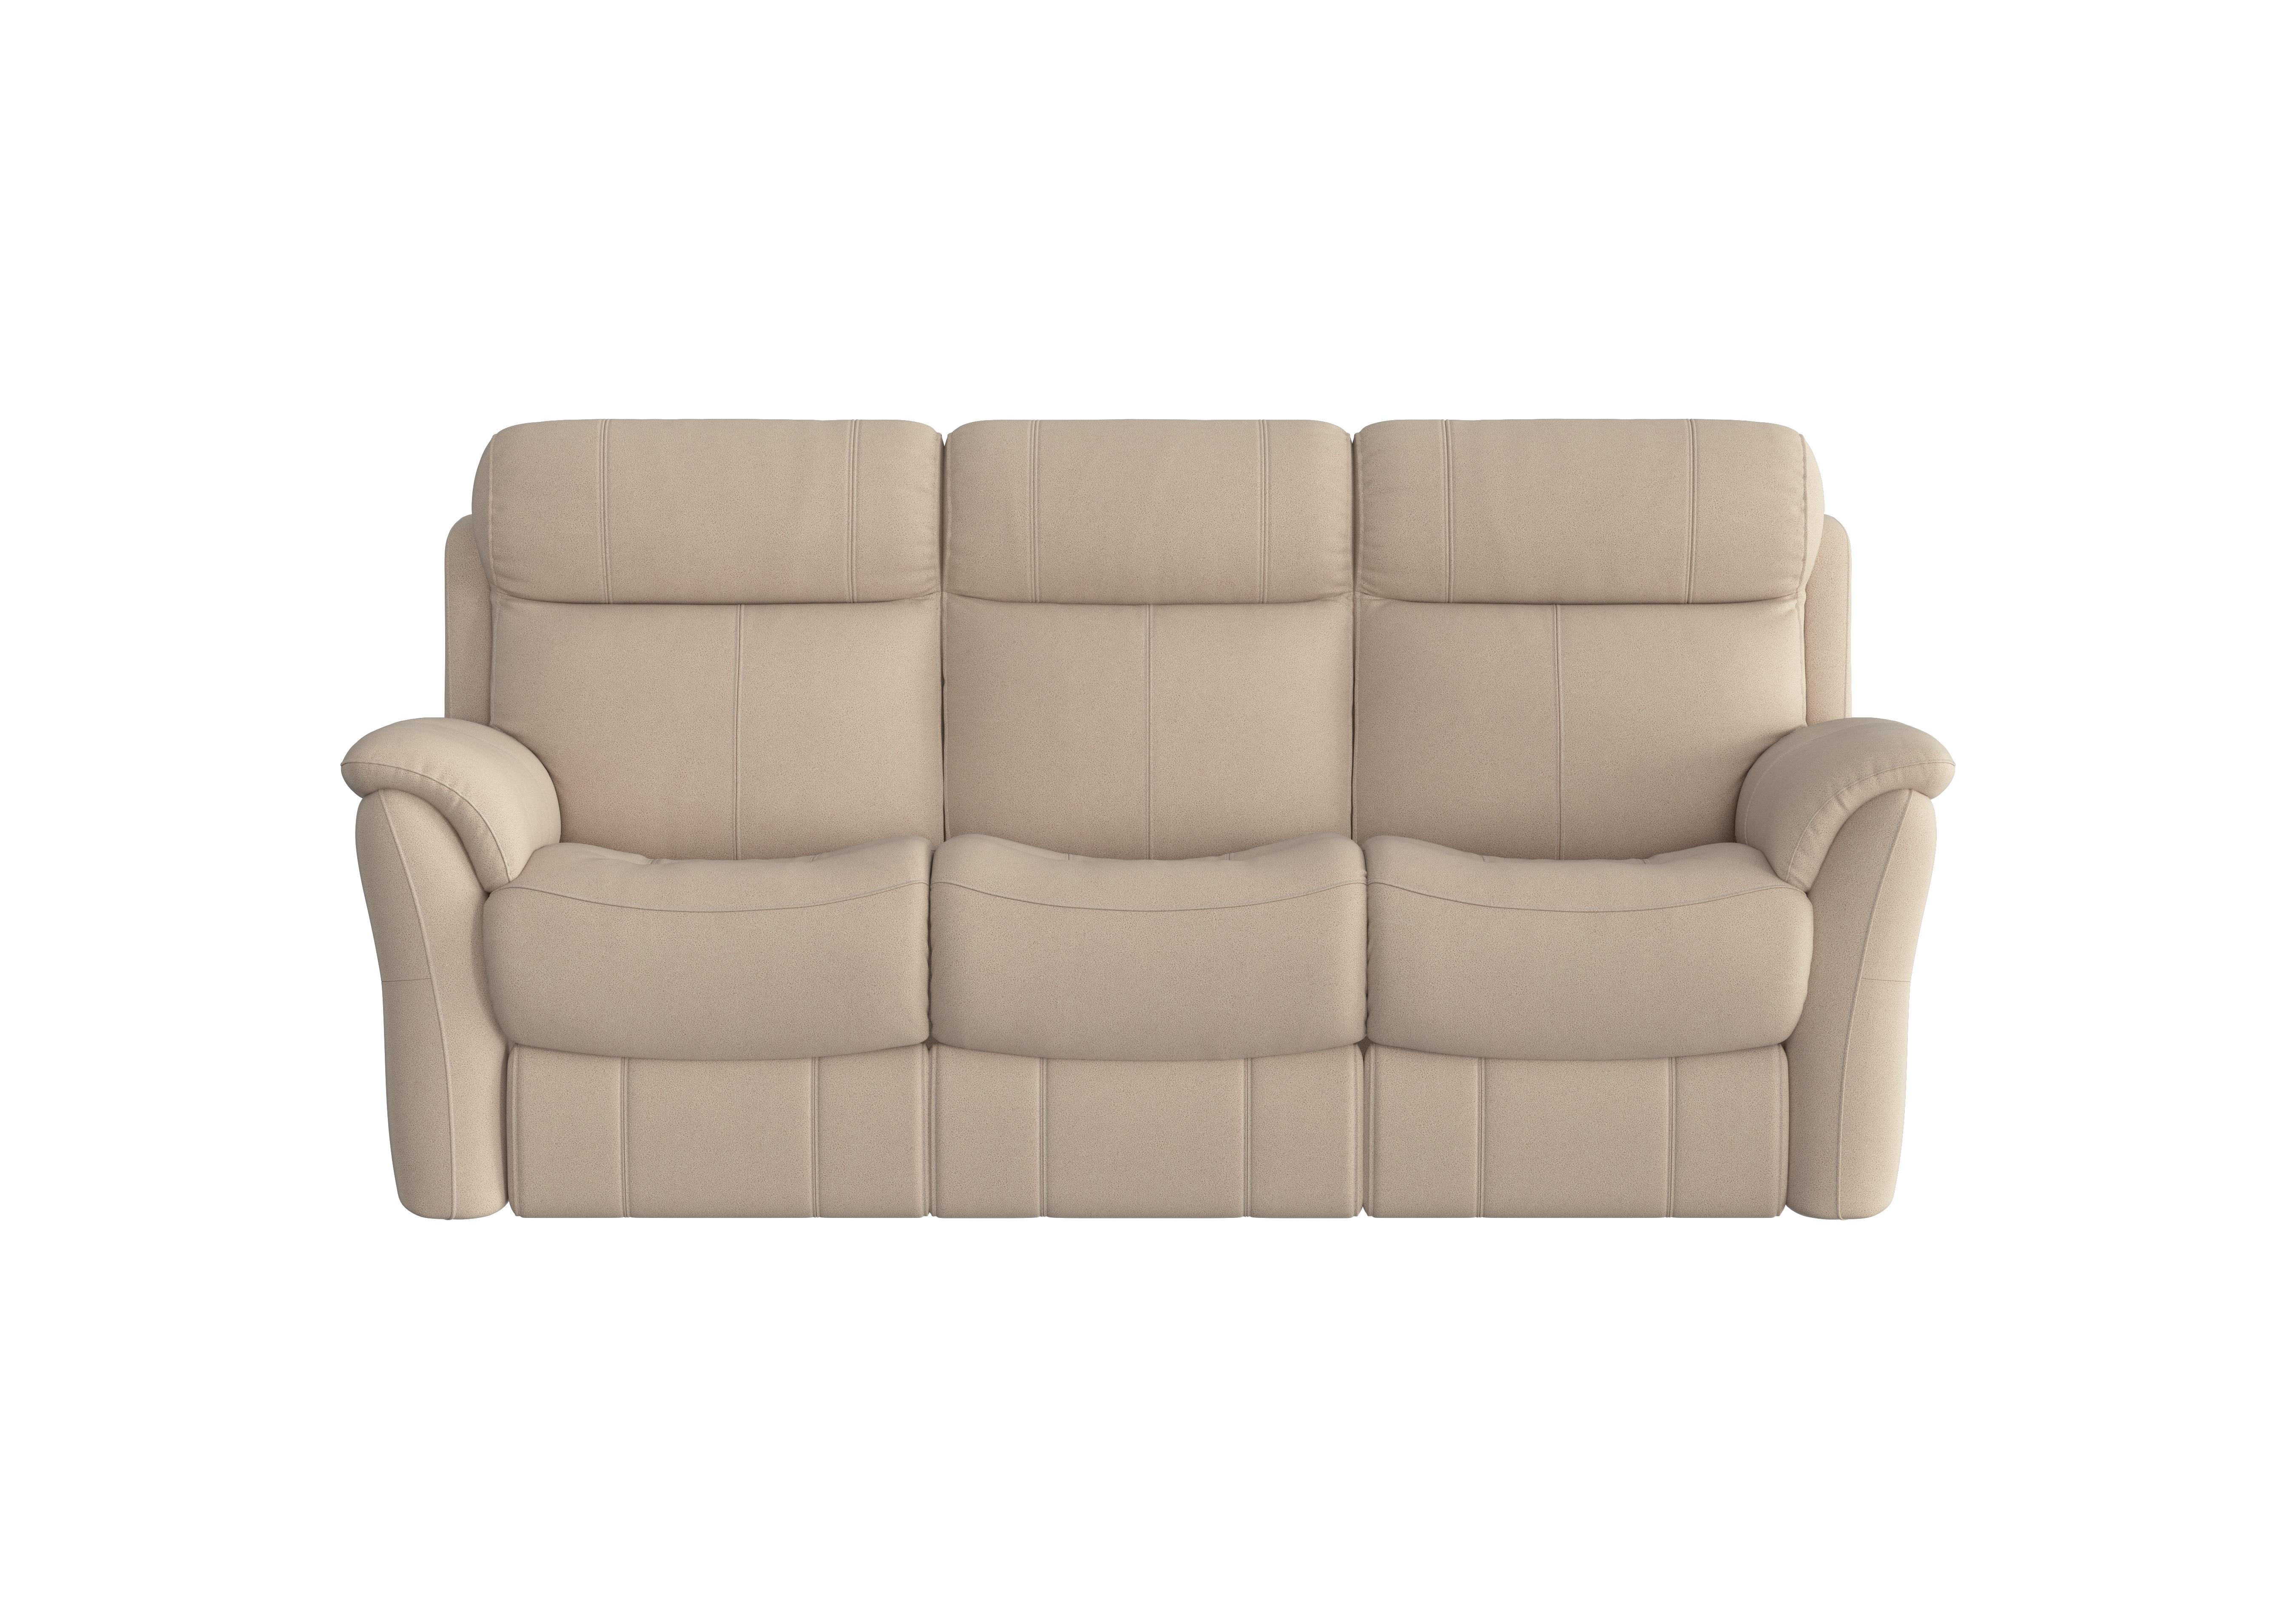 Relax Station Revive 3 Seater Fabric Sofa in Bfa-Blj-R20 Bisque on Furniture Village